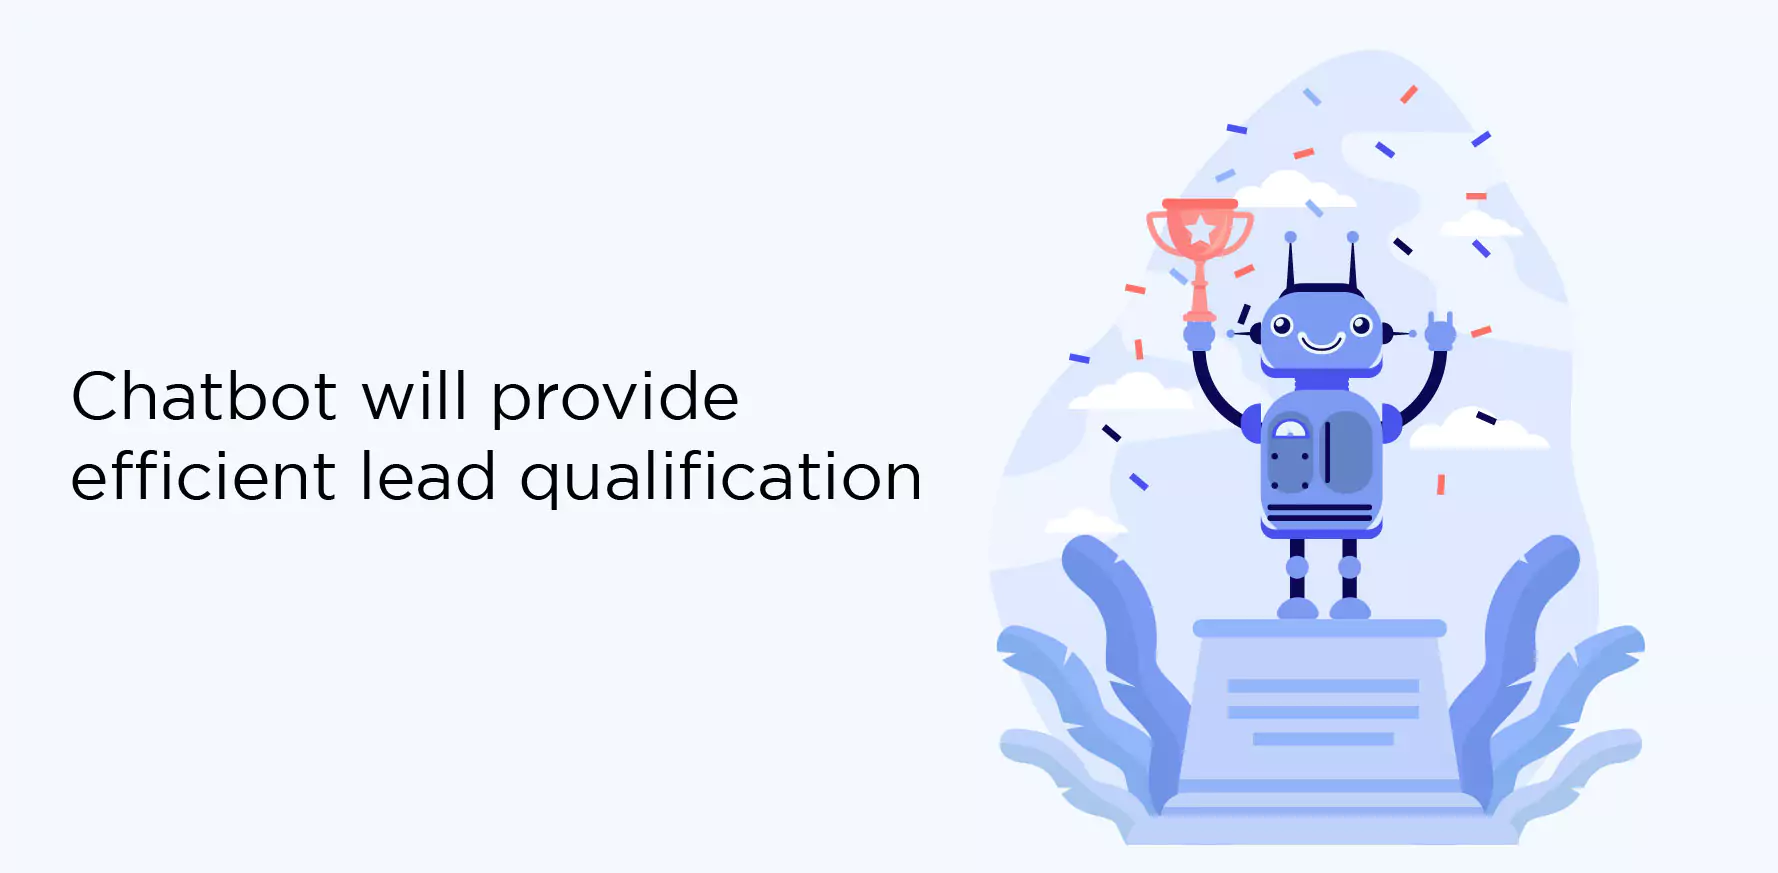 The chatbot will provide efficient lead qualification.